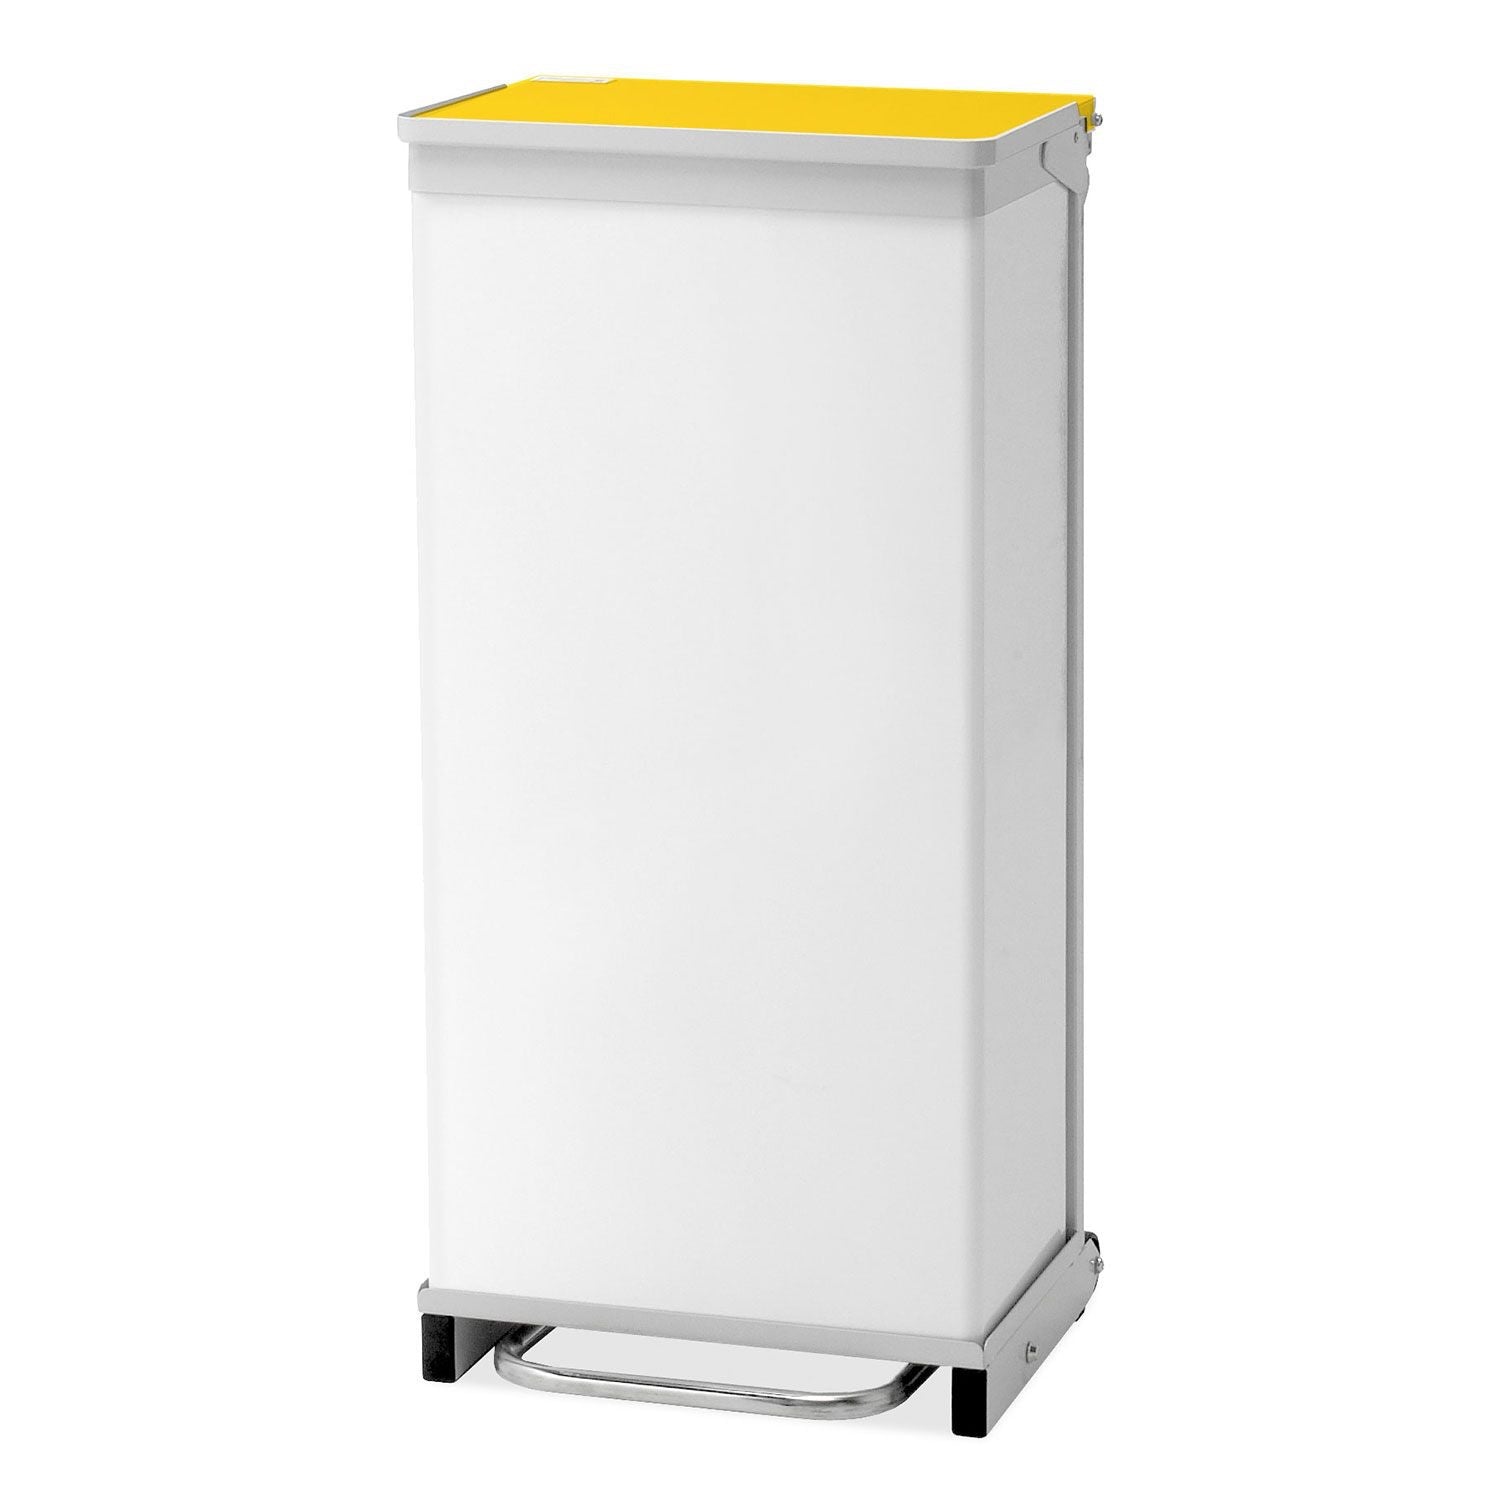 Bristol Maid 90L Hands Free Bin With a Yellow Lid